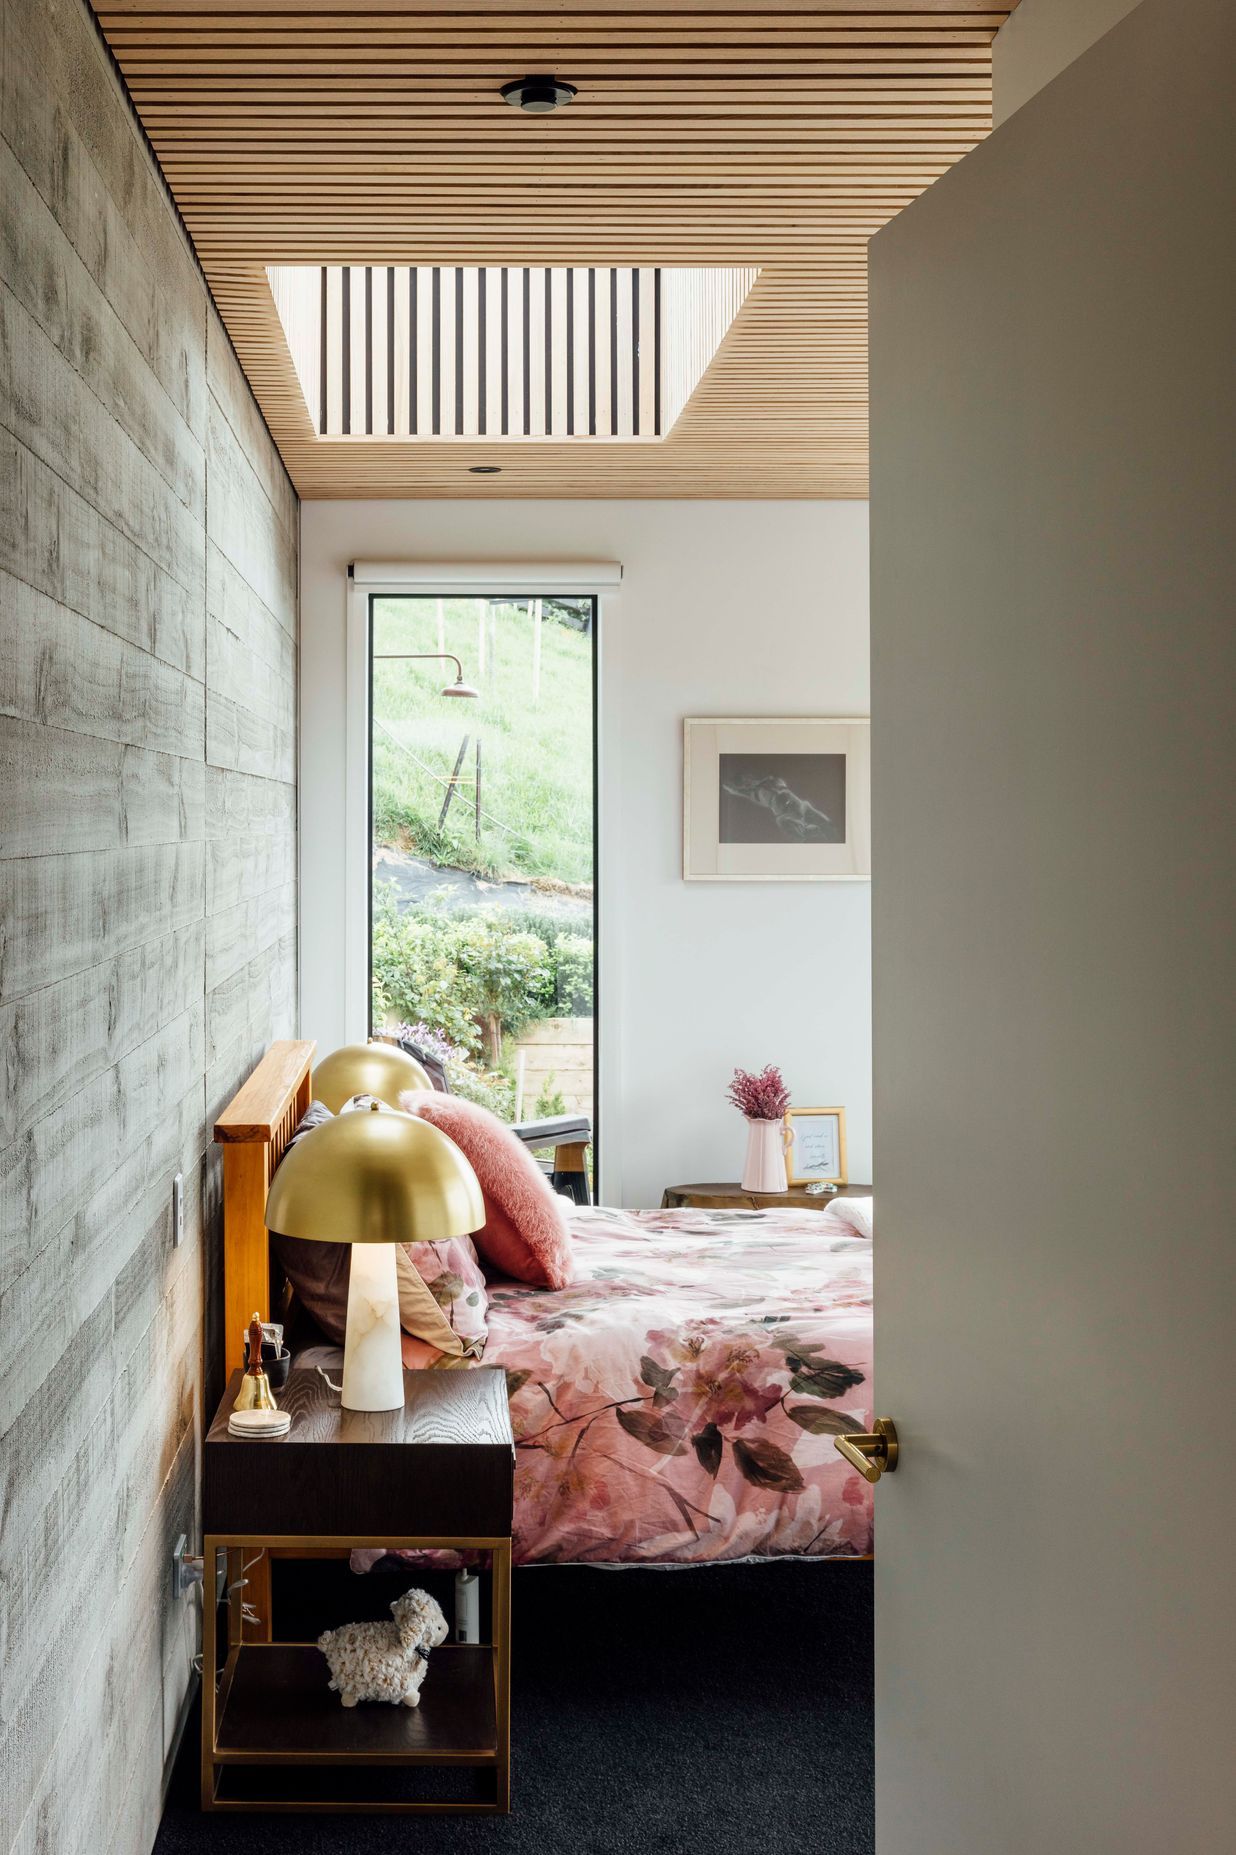 A roughsawn, timber-finished concrete wall in the main bedroom and ceilings clad in American ash battens bring texture to the material palette.